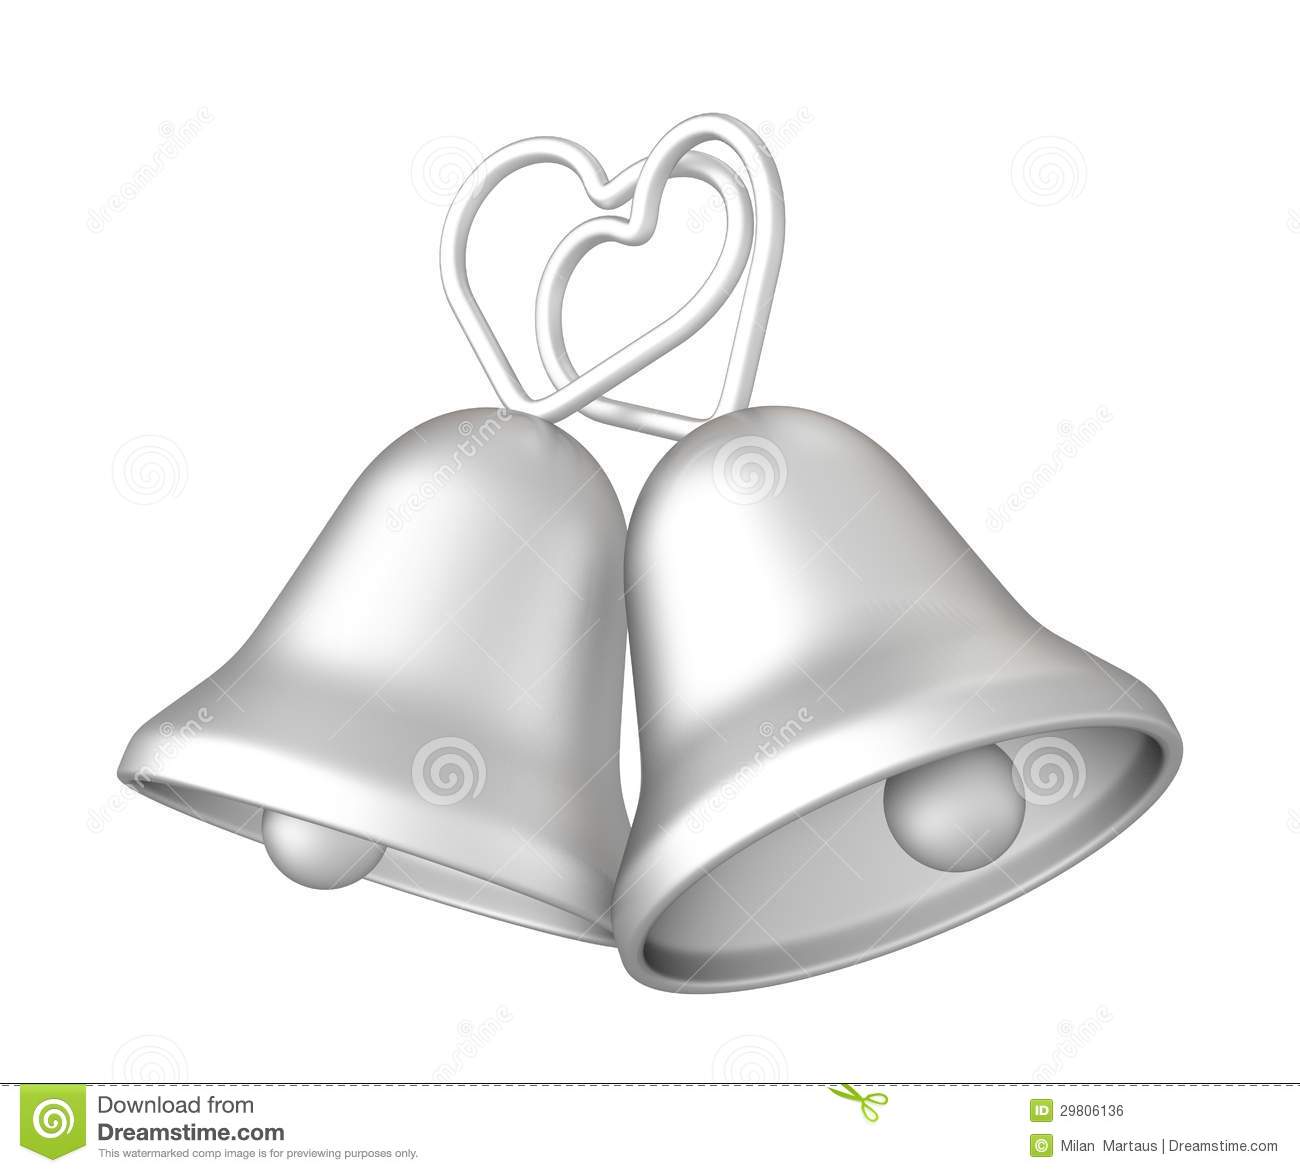 3d Silver Wedding Bells Royalty Free Stock Image   Image  29806136